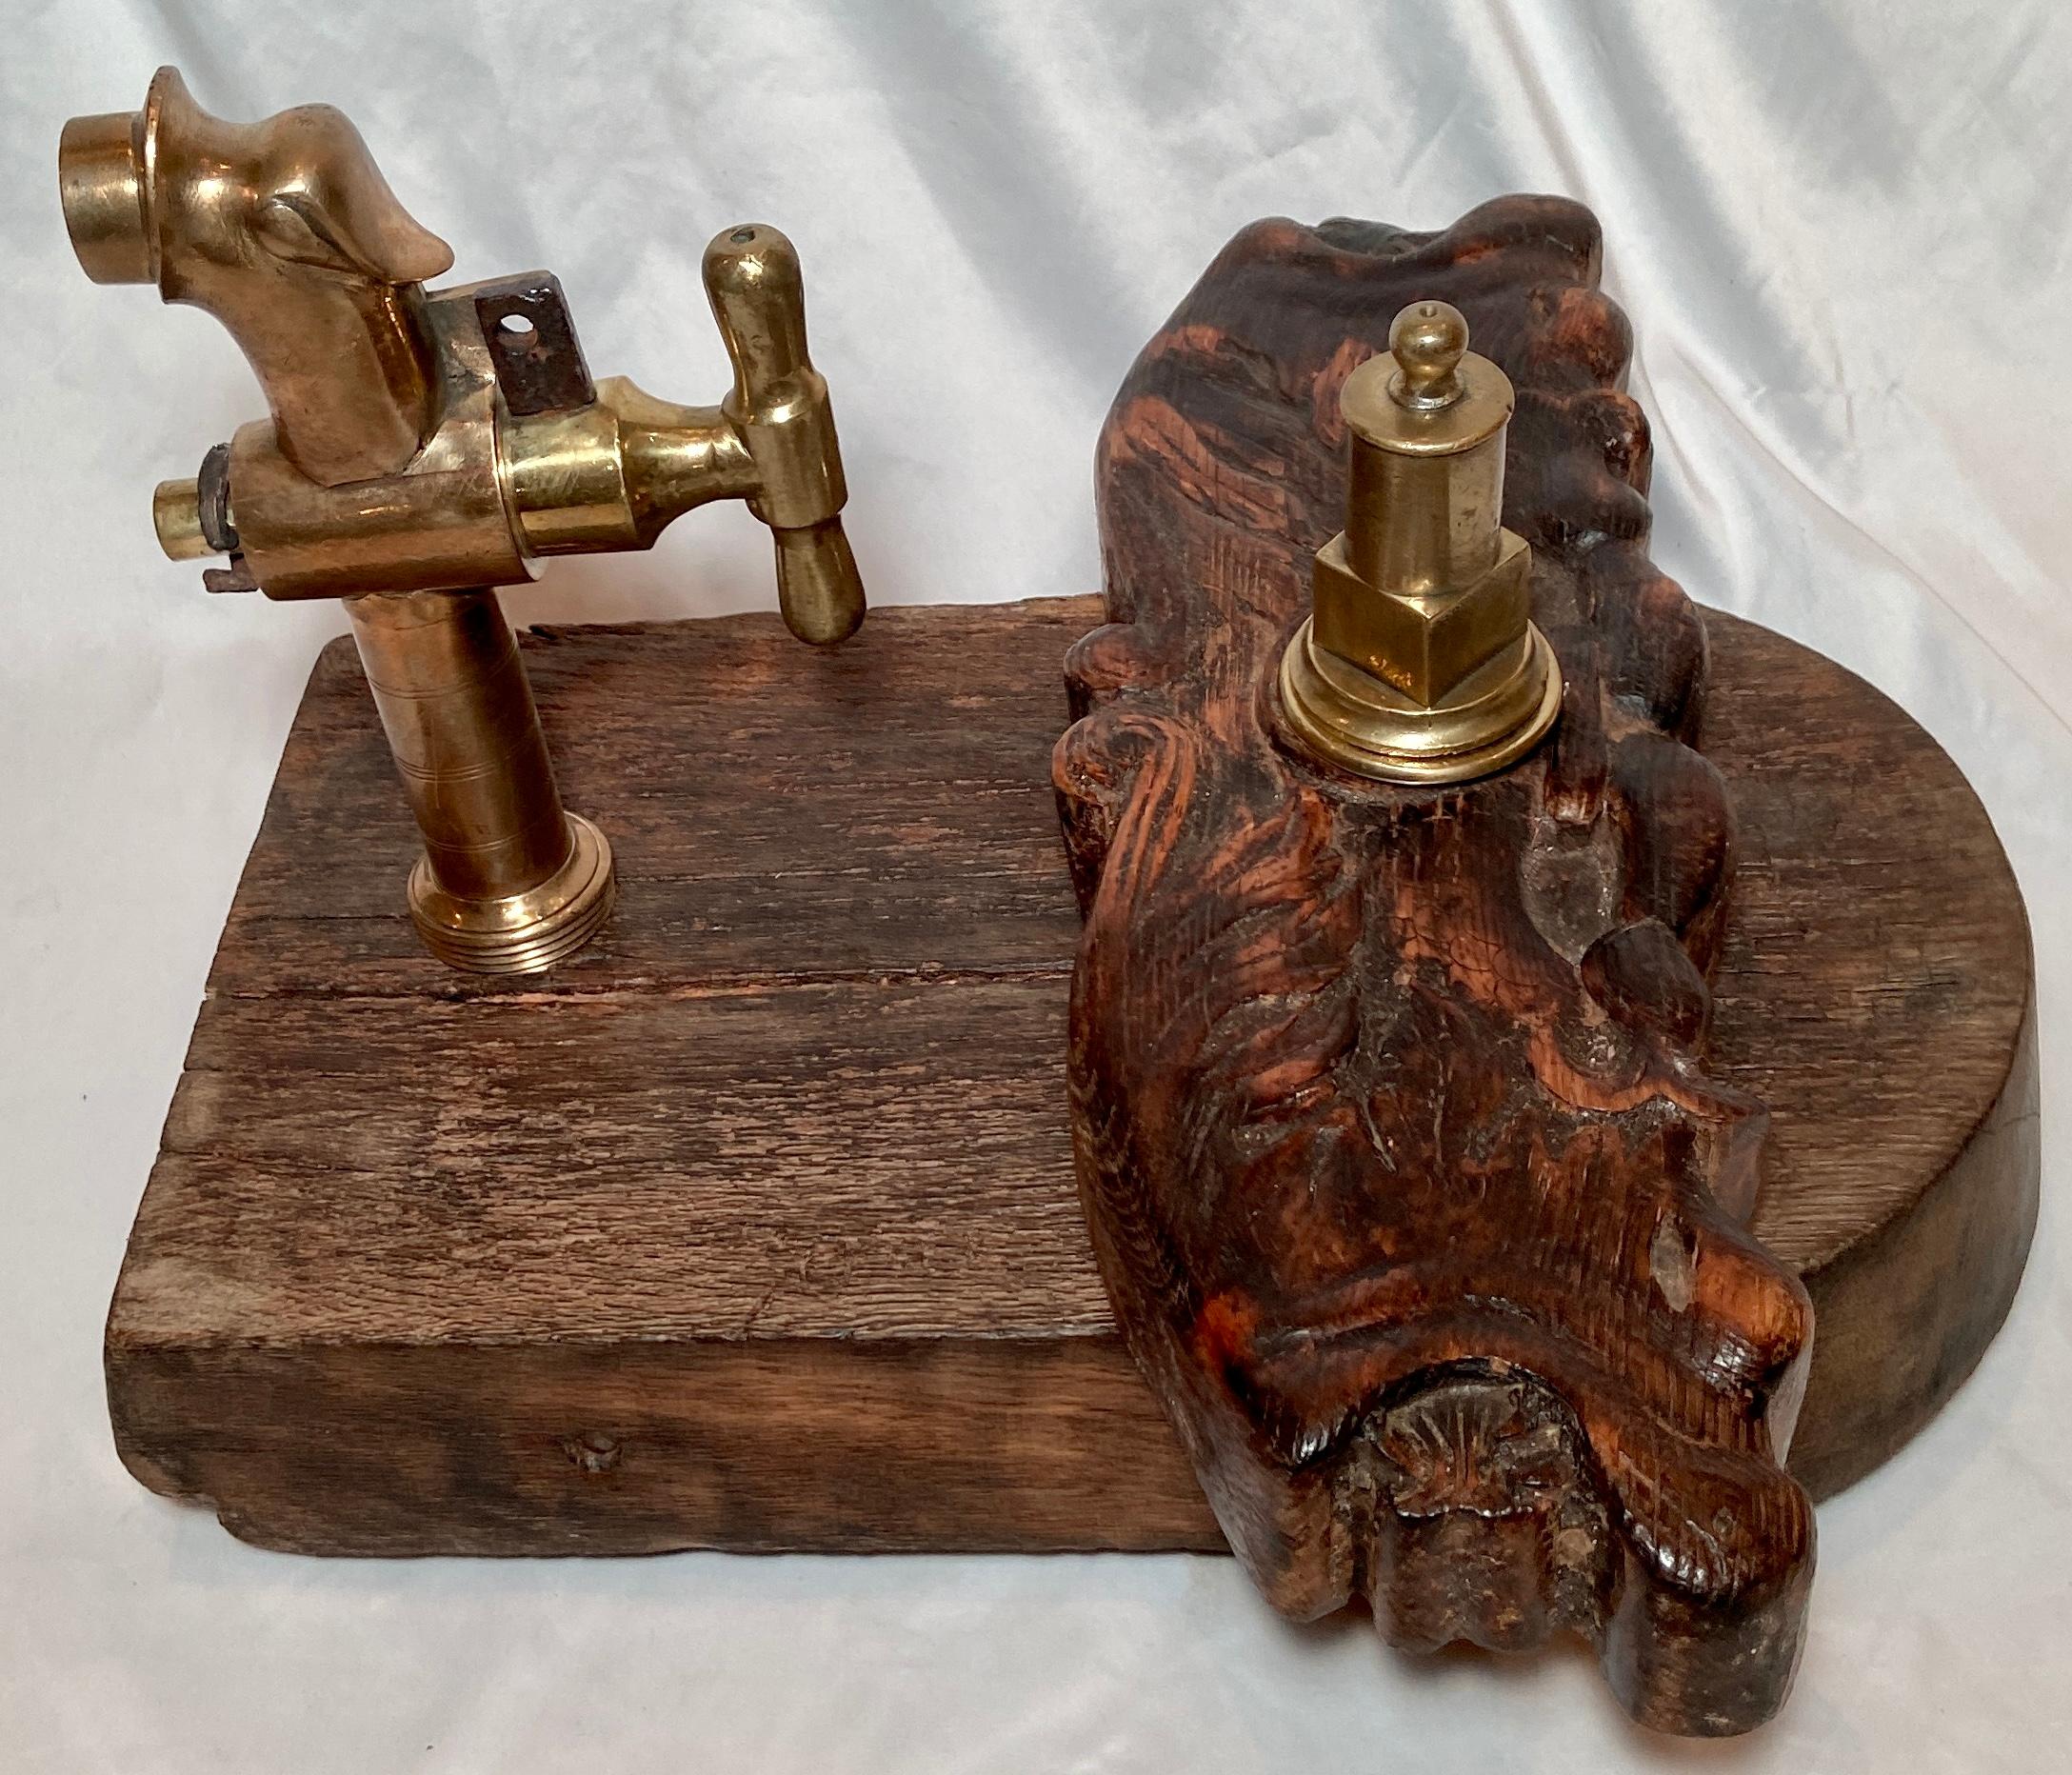 Antique oak and brass beer or wine dispenser, Circa 1870s.